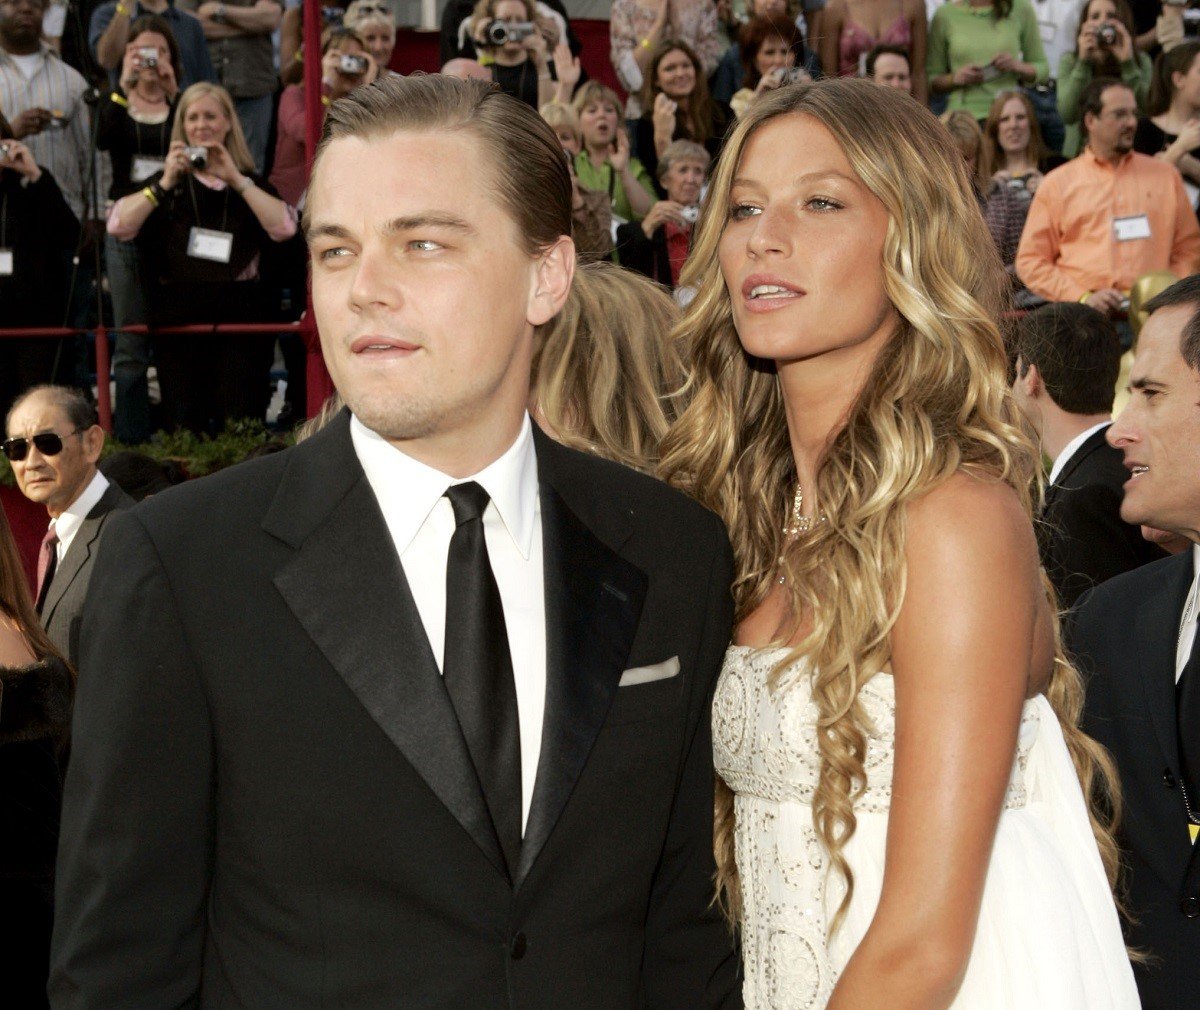 Leonardo DiCaprio and Gisele Bundchen, who has the higher net worth, on the red carpet together at the 77th Academy Awards